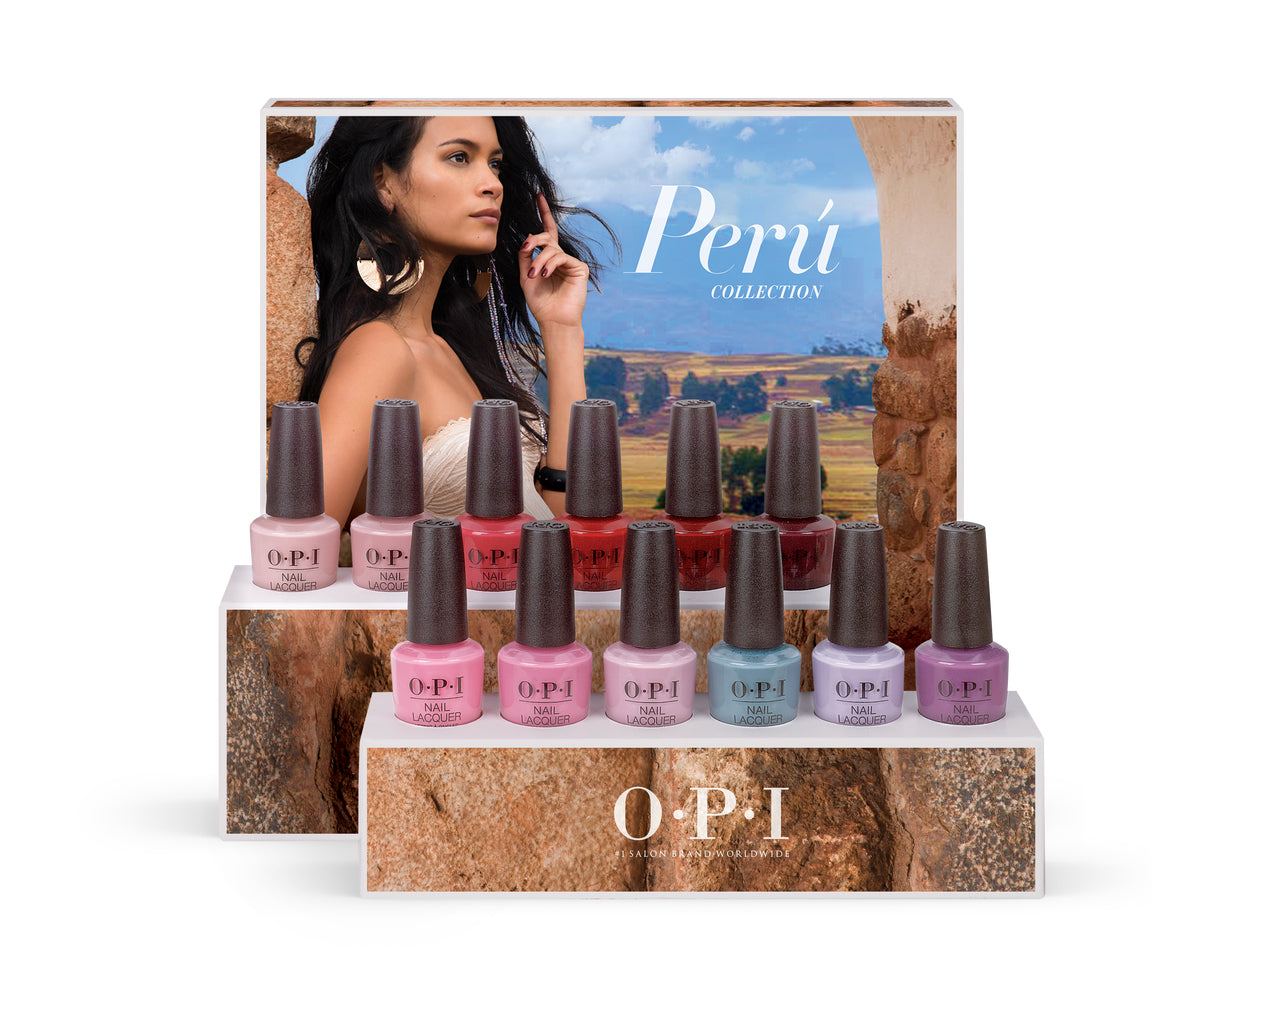 OPI Nail Polish Peru Collection 2018Nail PolishOPIColor: P30 Lima Tell You About It, P31 Suzi Will Quechua Later, P32 Seven Wonders of OPI, P33 Alpaca My Bags, P34 Don't Toot My Flute, P35 Grandma Kissed Gaucho, P36 Machu Peach-U, P37 Somewhere Over The R